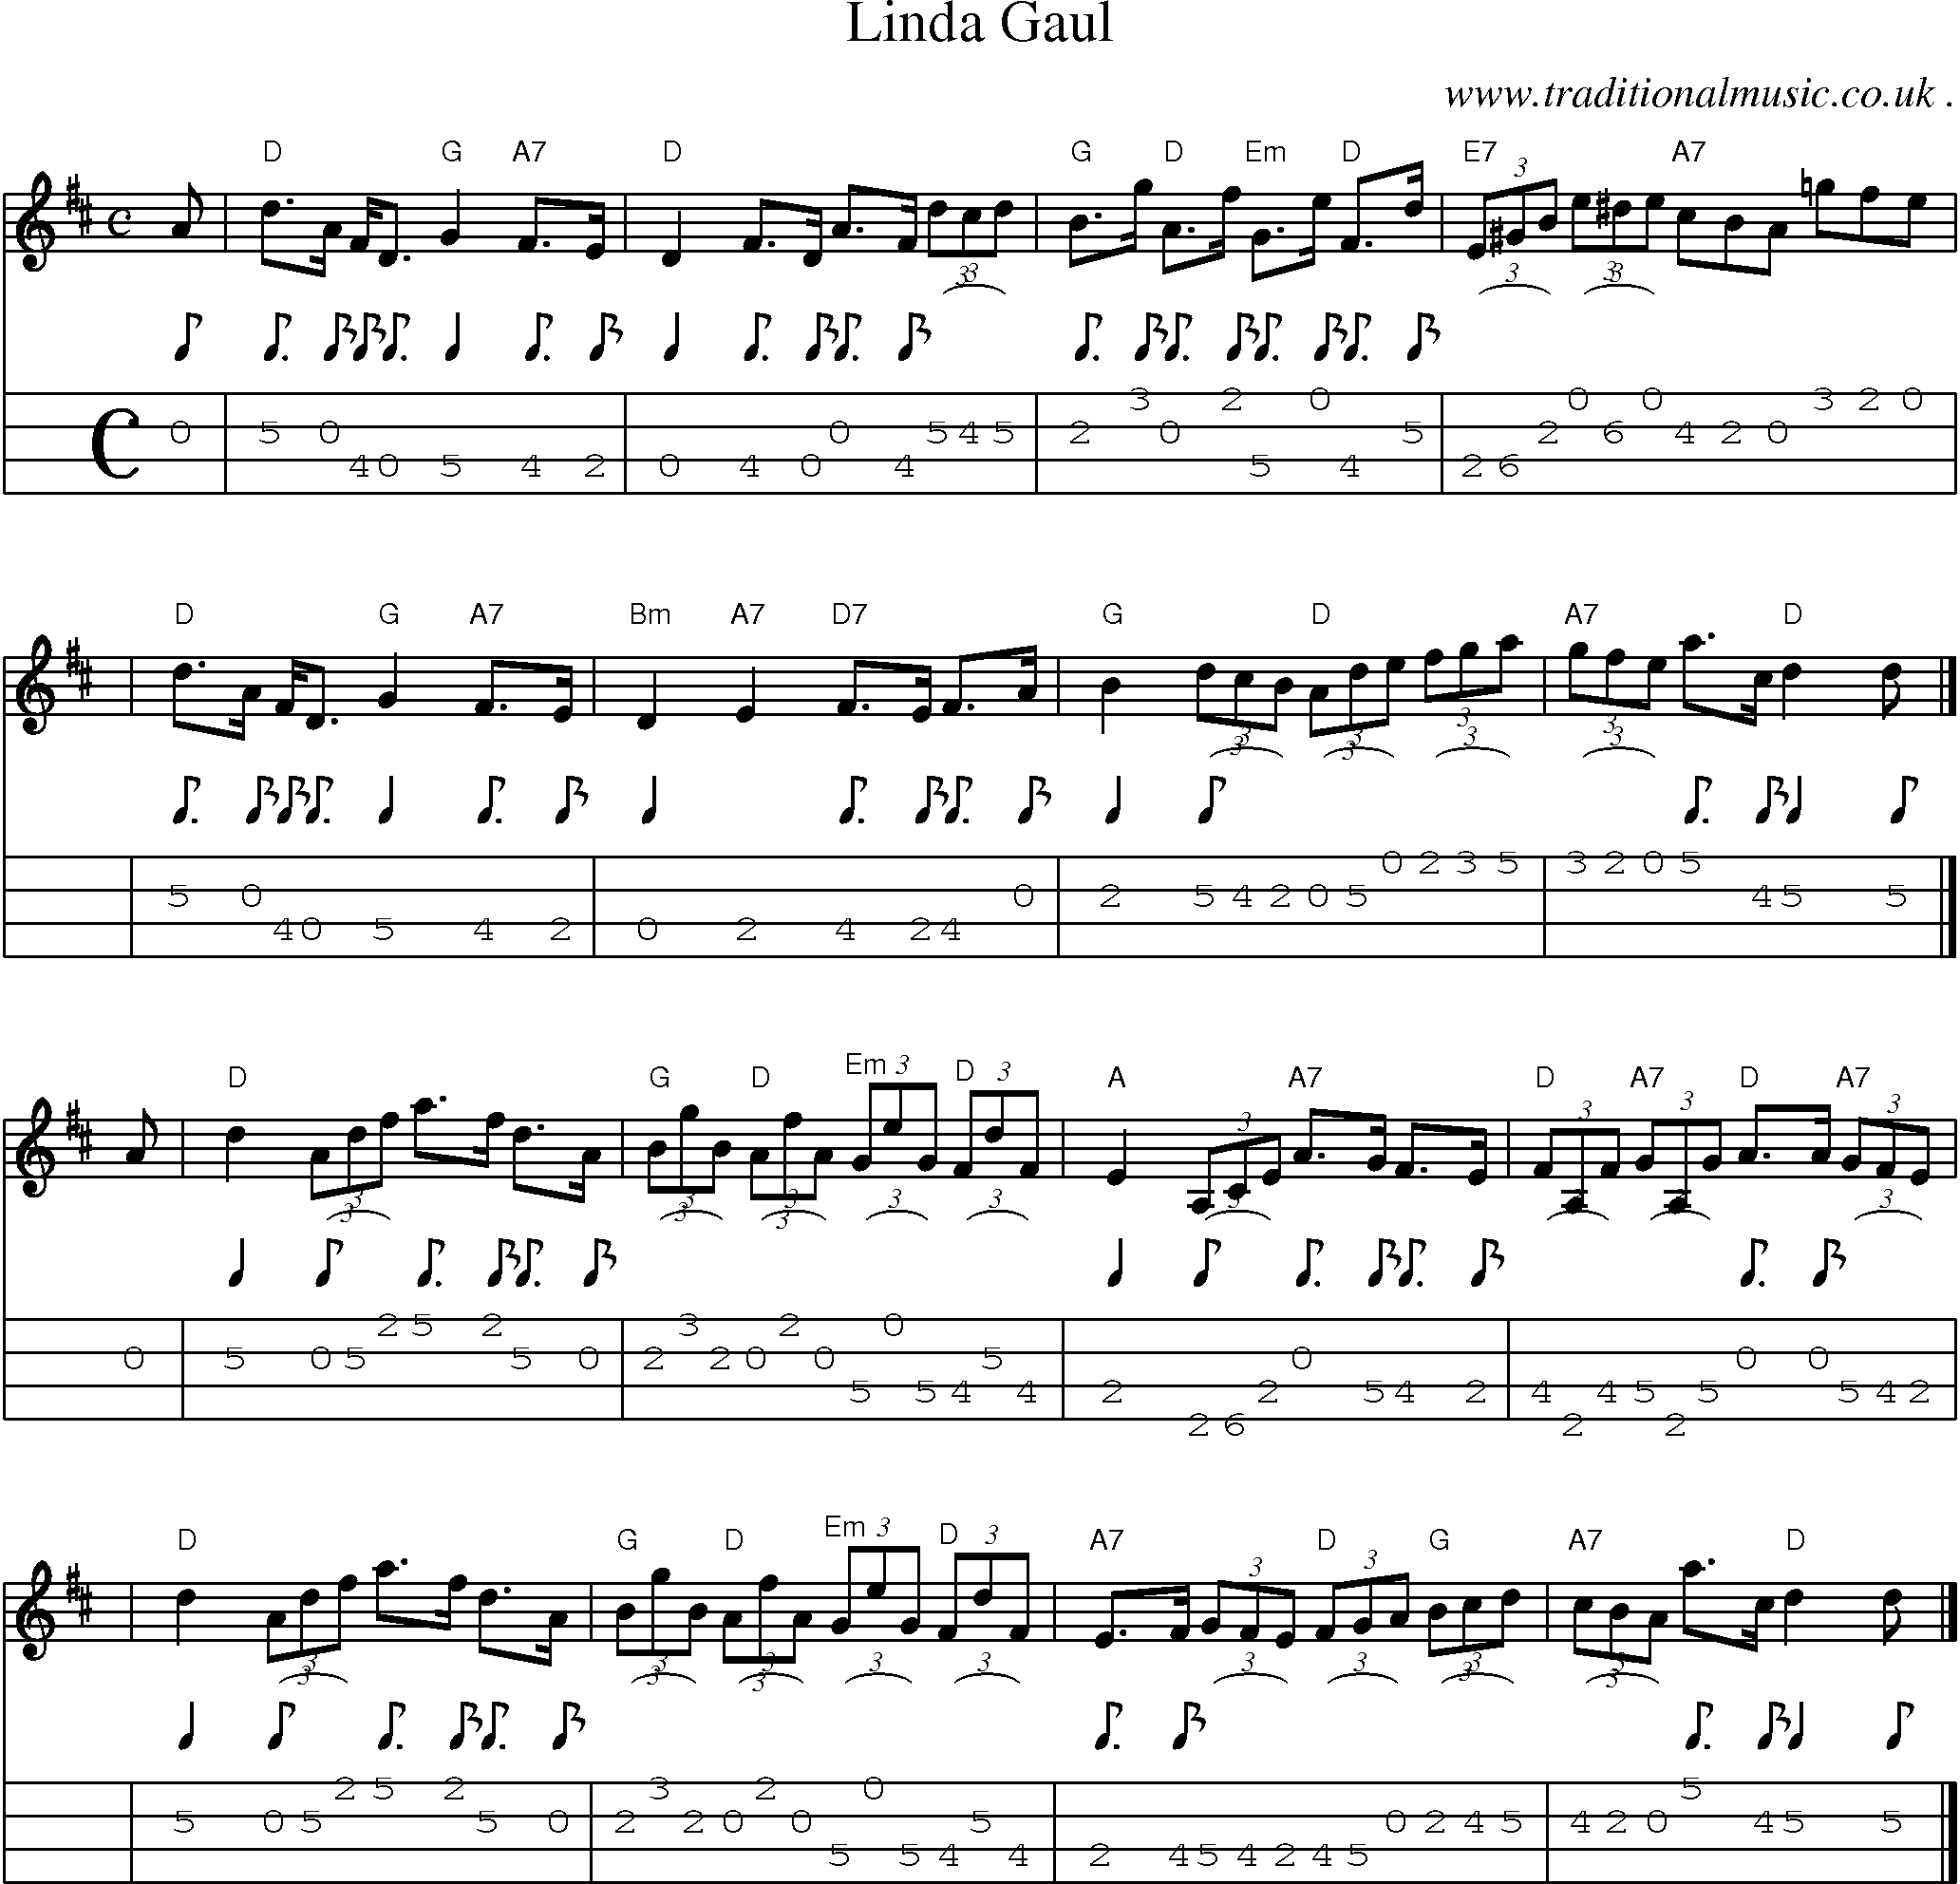 Sheet-music  score, Chords and Mandolin Tabs for Linda Gaul